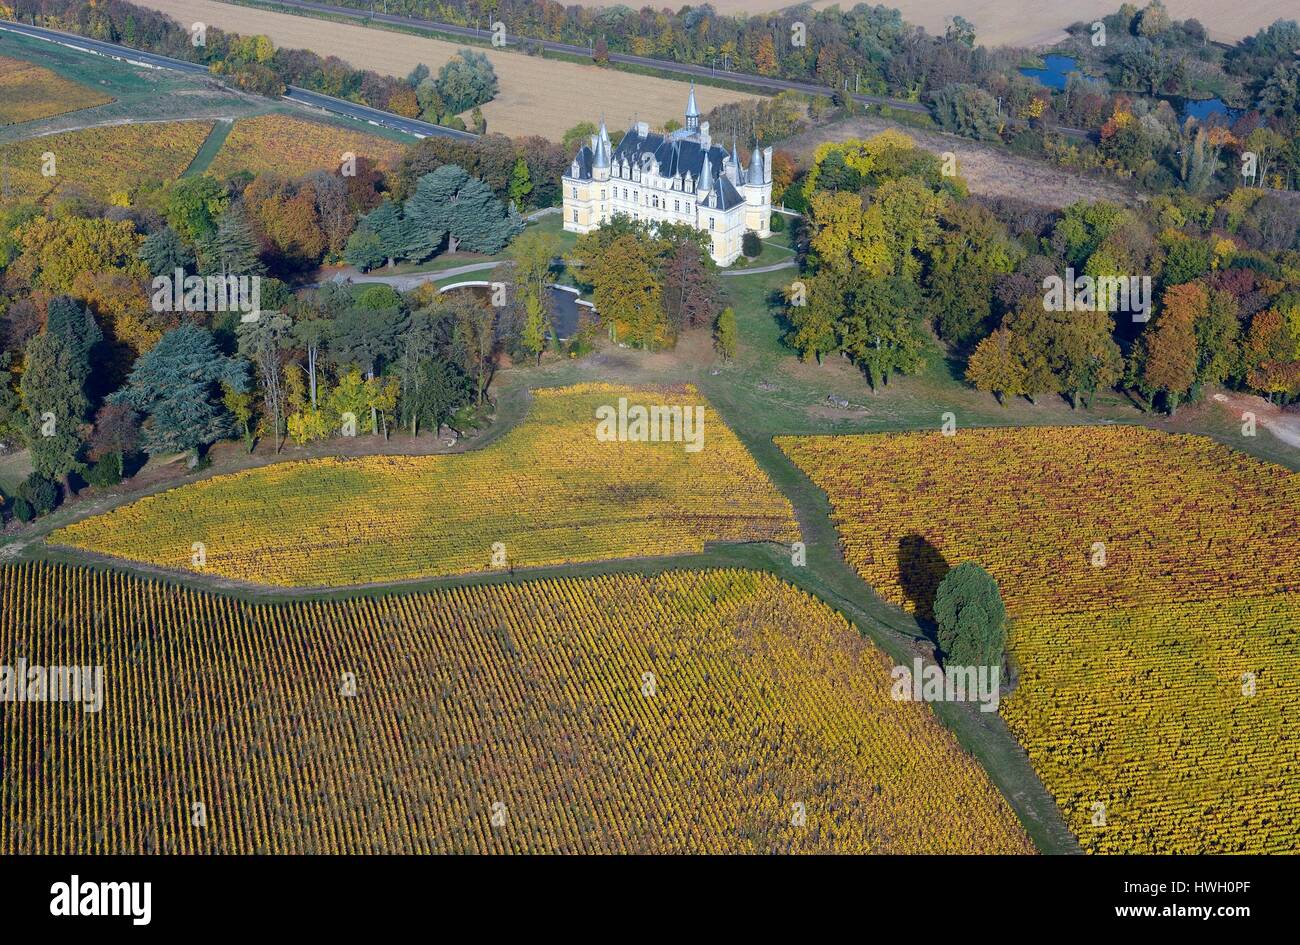 Veuve clicquot vineyard hi-res stock photography and images - Alamy